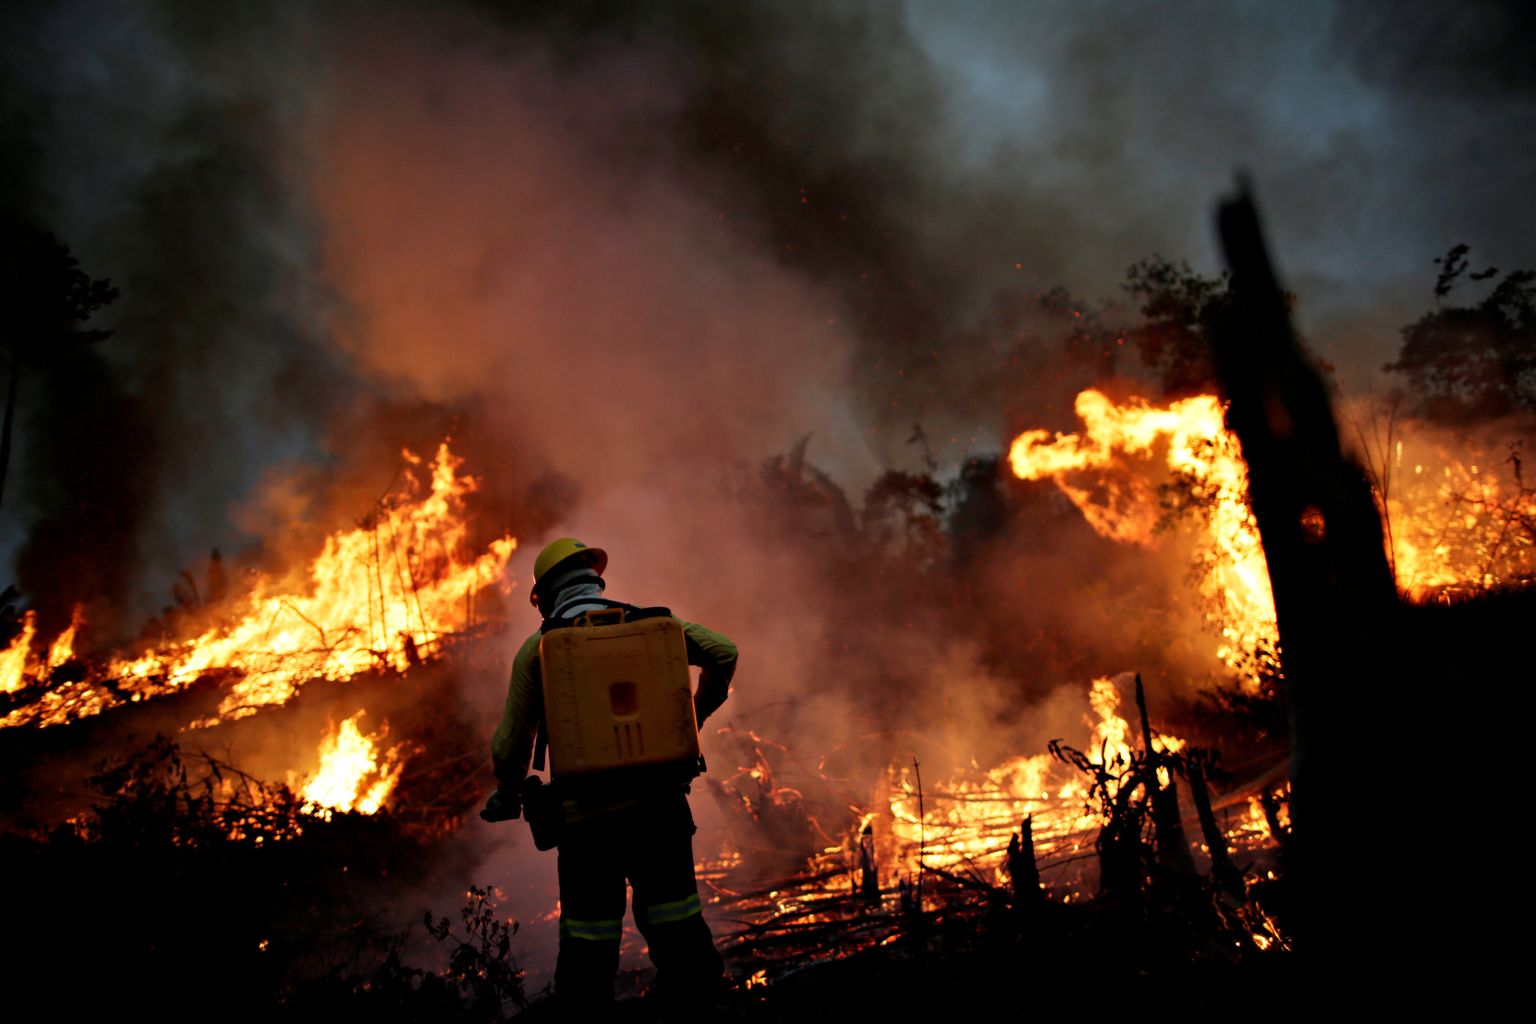 FILE PHOTO: A Brazilian Institute for the Environment and Renewable Natural Resources (IBAMA) fire brigade member attempts to control a fire in a tract of the Amazon jungle in Apui, Amazonas State, Brazil, August 11, 2020. Picture taken August 11, 2020. REUTERS/Ueslei Marcelino/File Photo